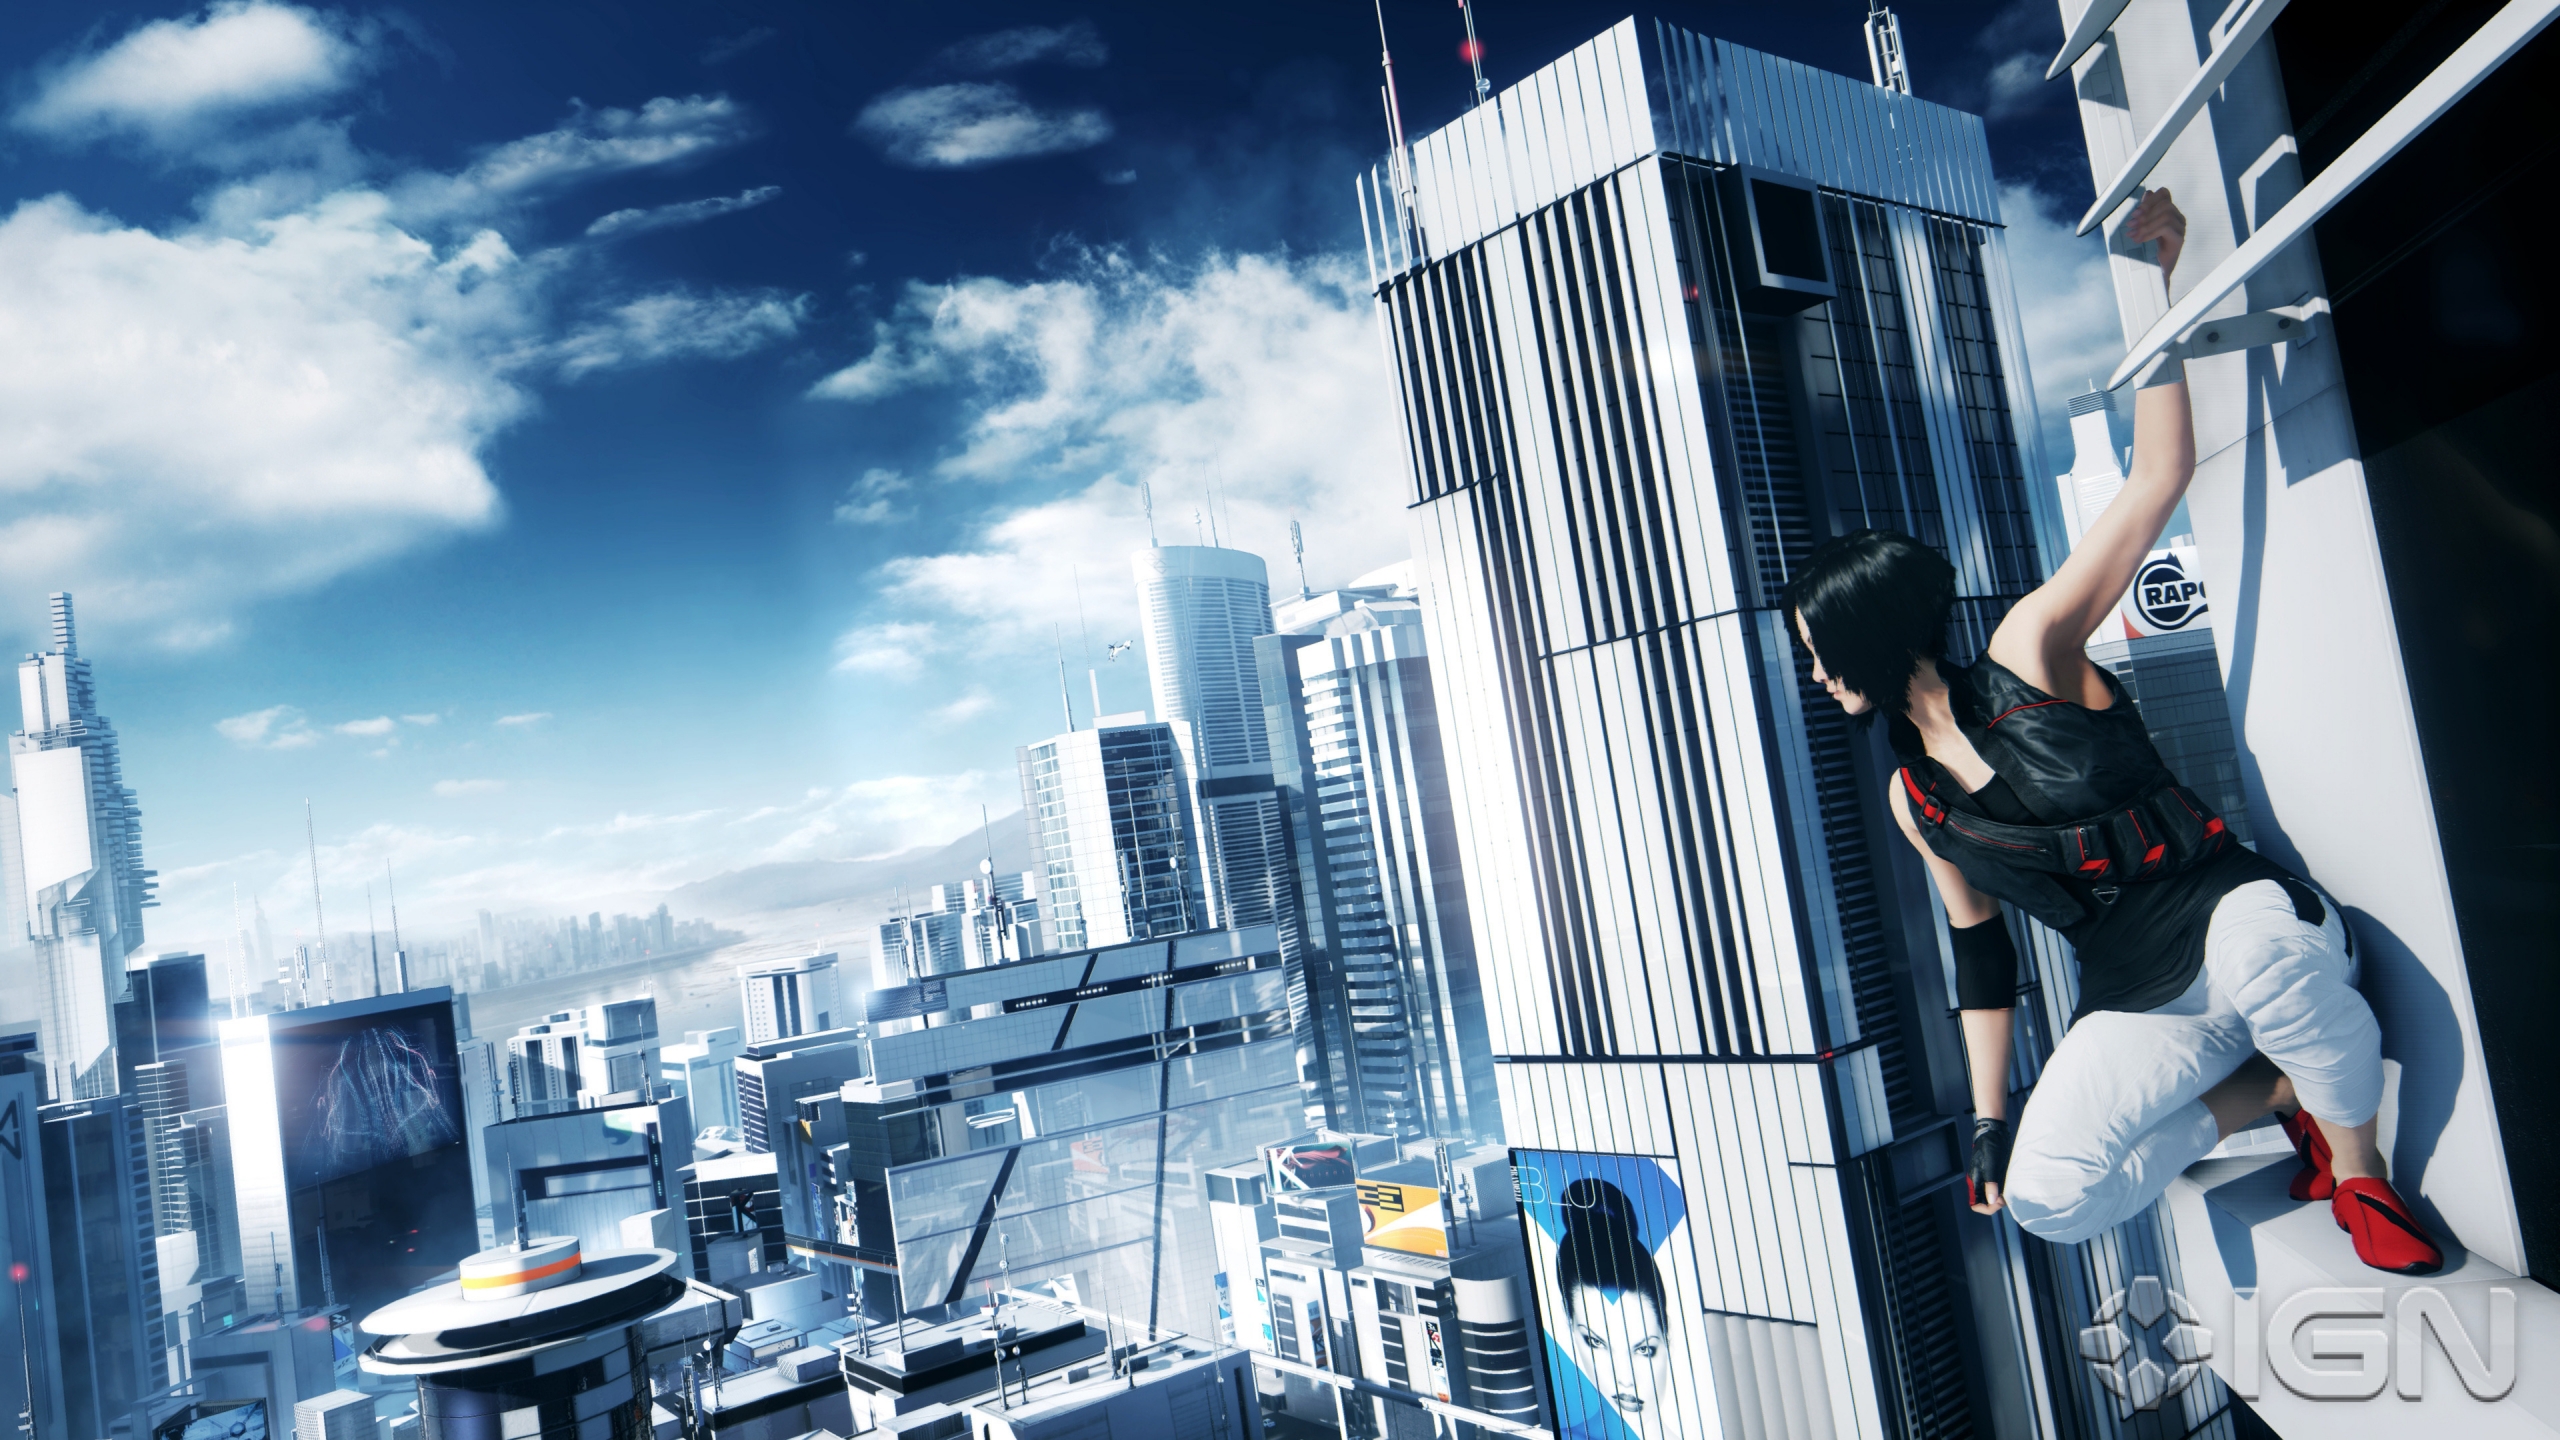 Mirrors Edge 2 for 2560x1440 HDTV resolution